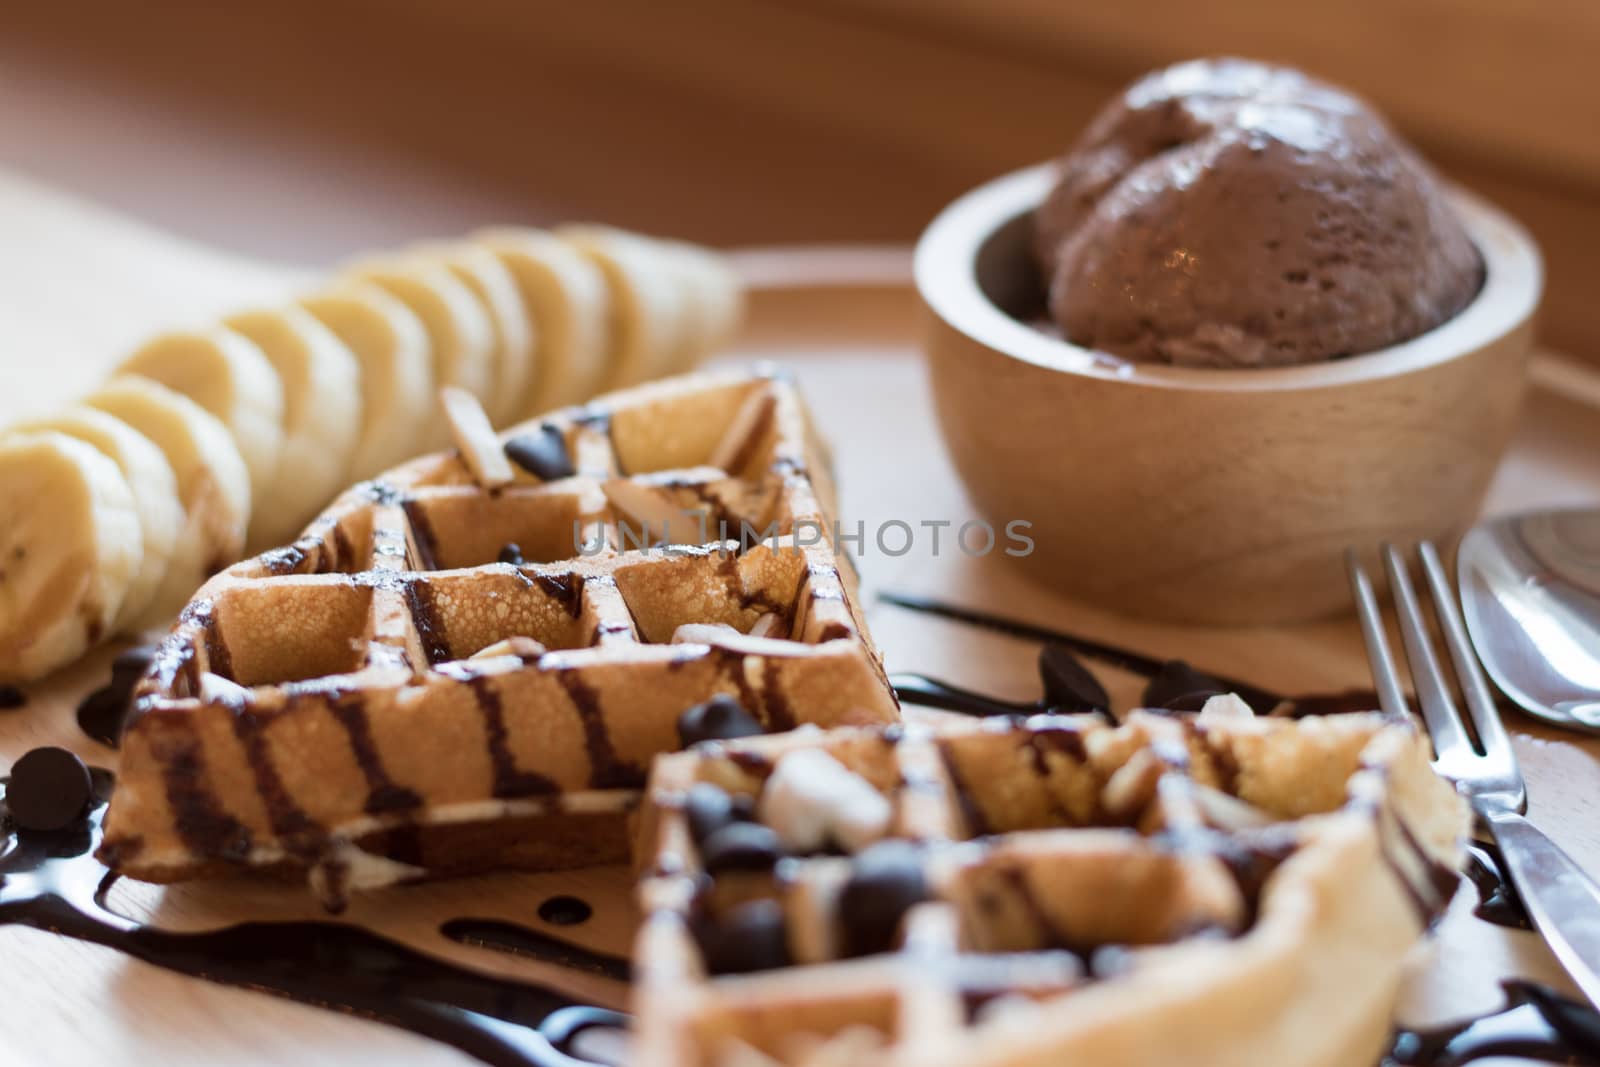 Belgian waffles with fruit and chocolate, forest fruit, all home by dfrsce